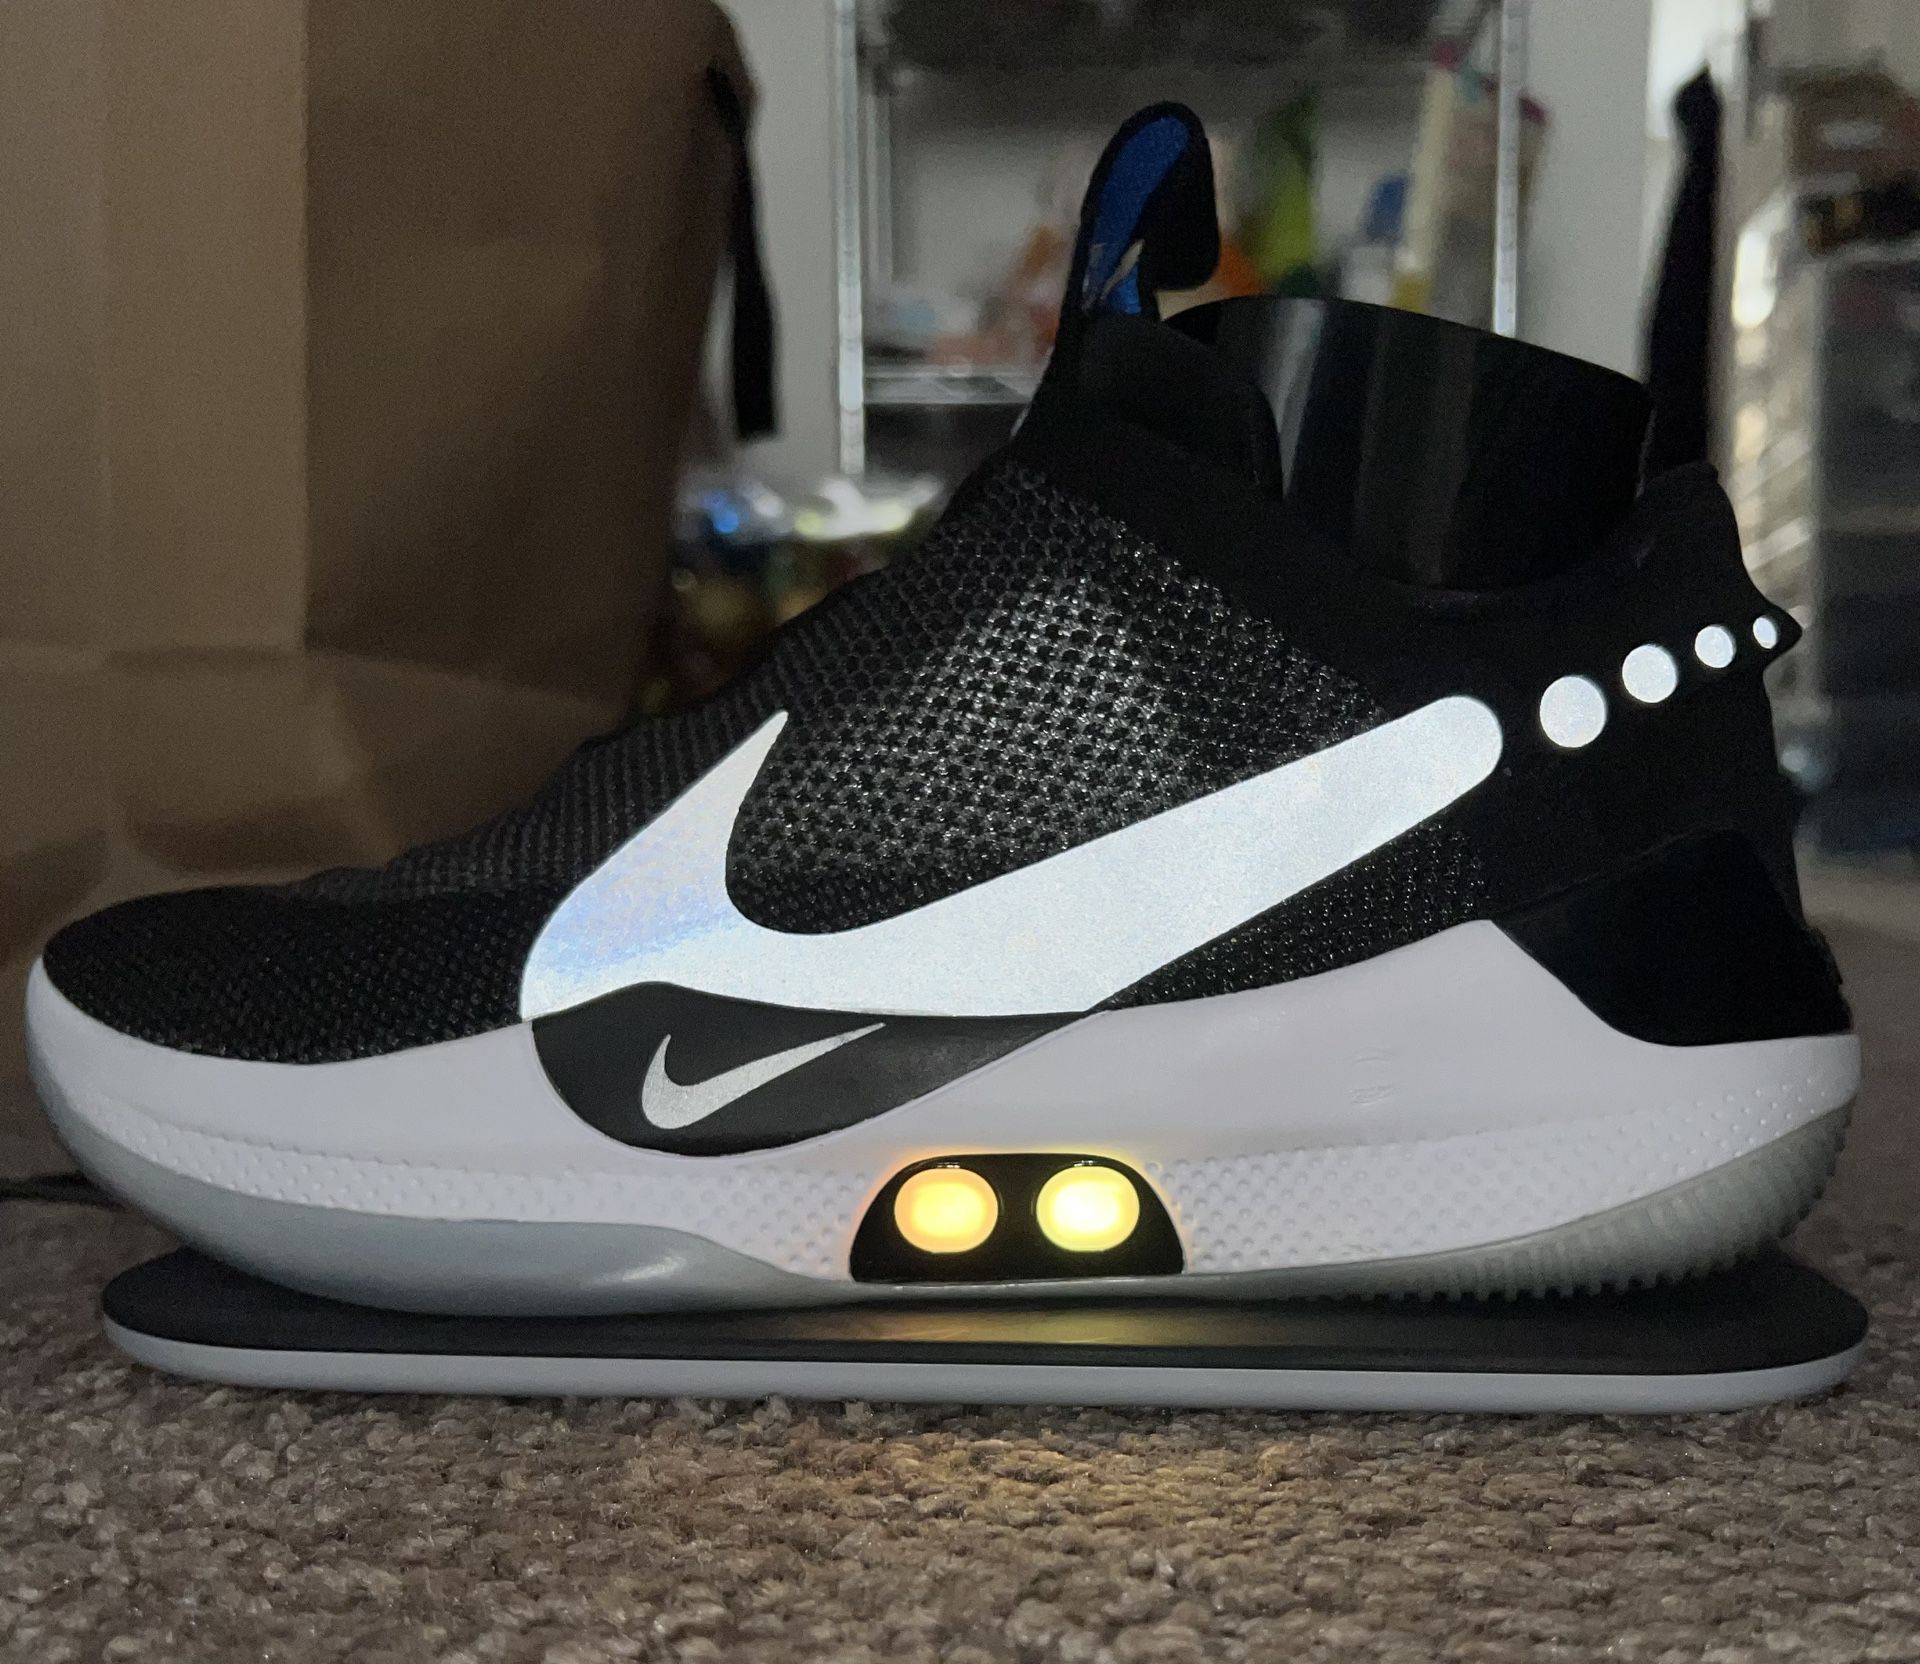 Nike Adapt BB Black Pure Platinum for Sale in Babylon, OfferUp